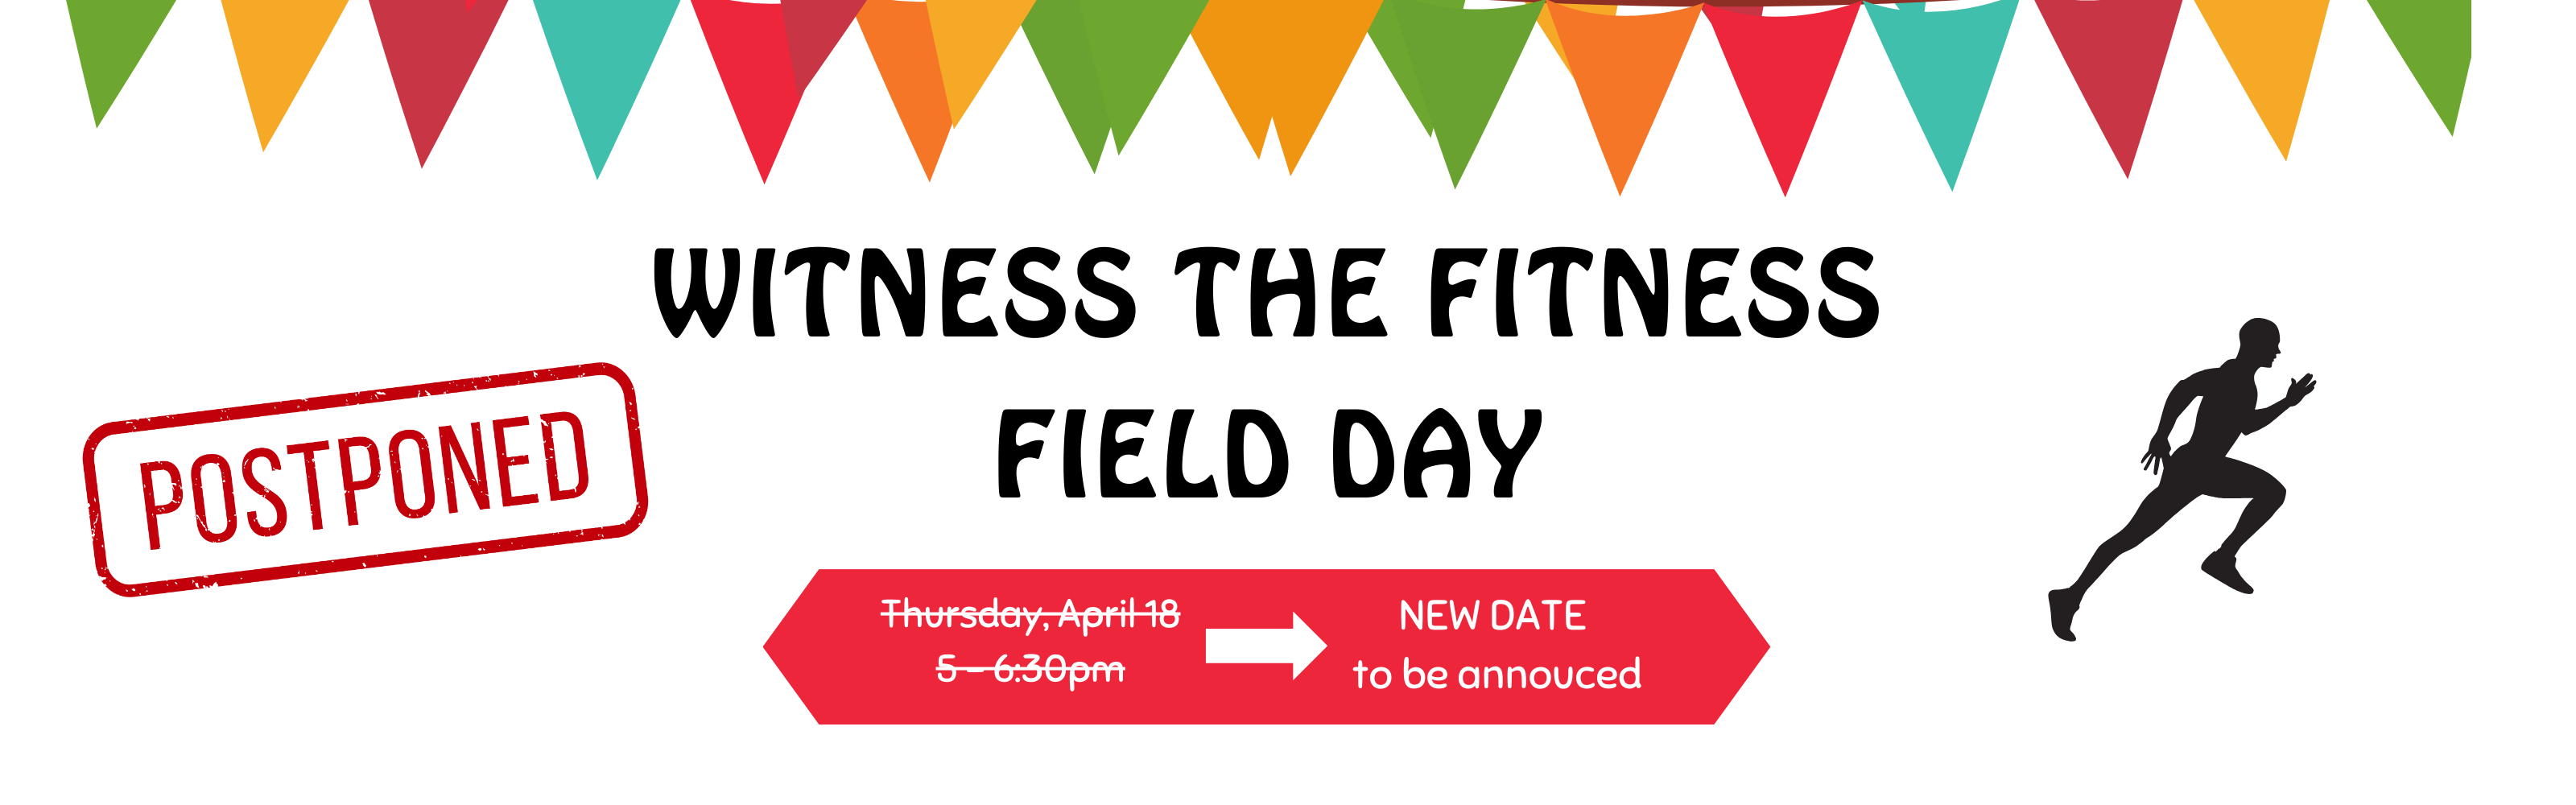 Witness the fitness field day has been postponed and the new date is to be annouced.